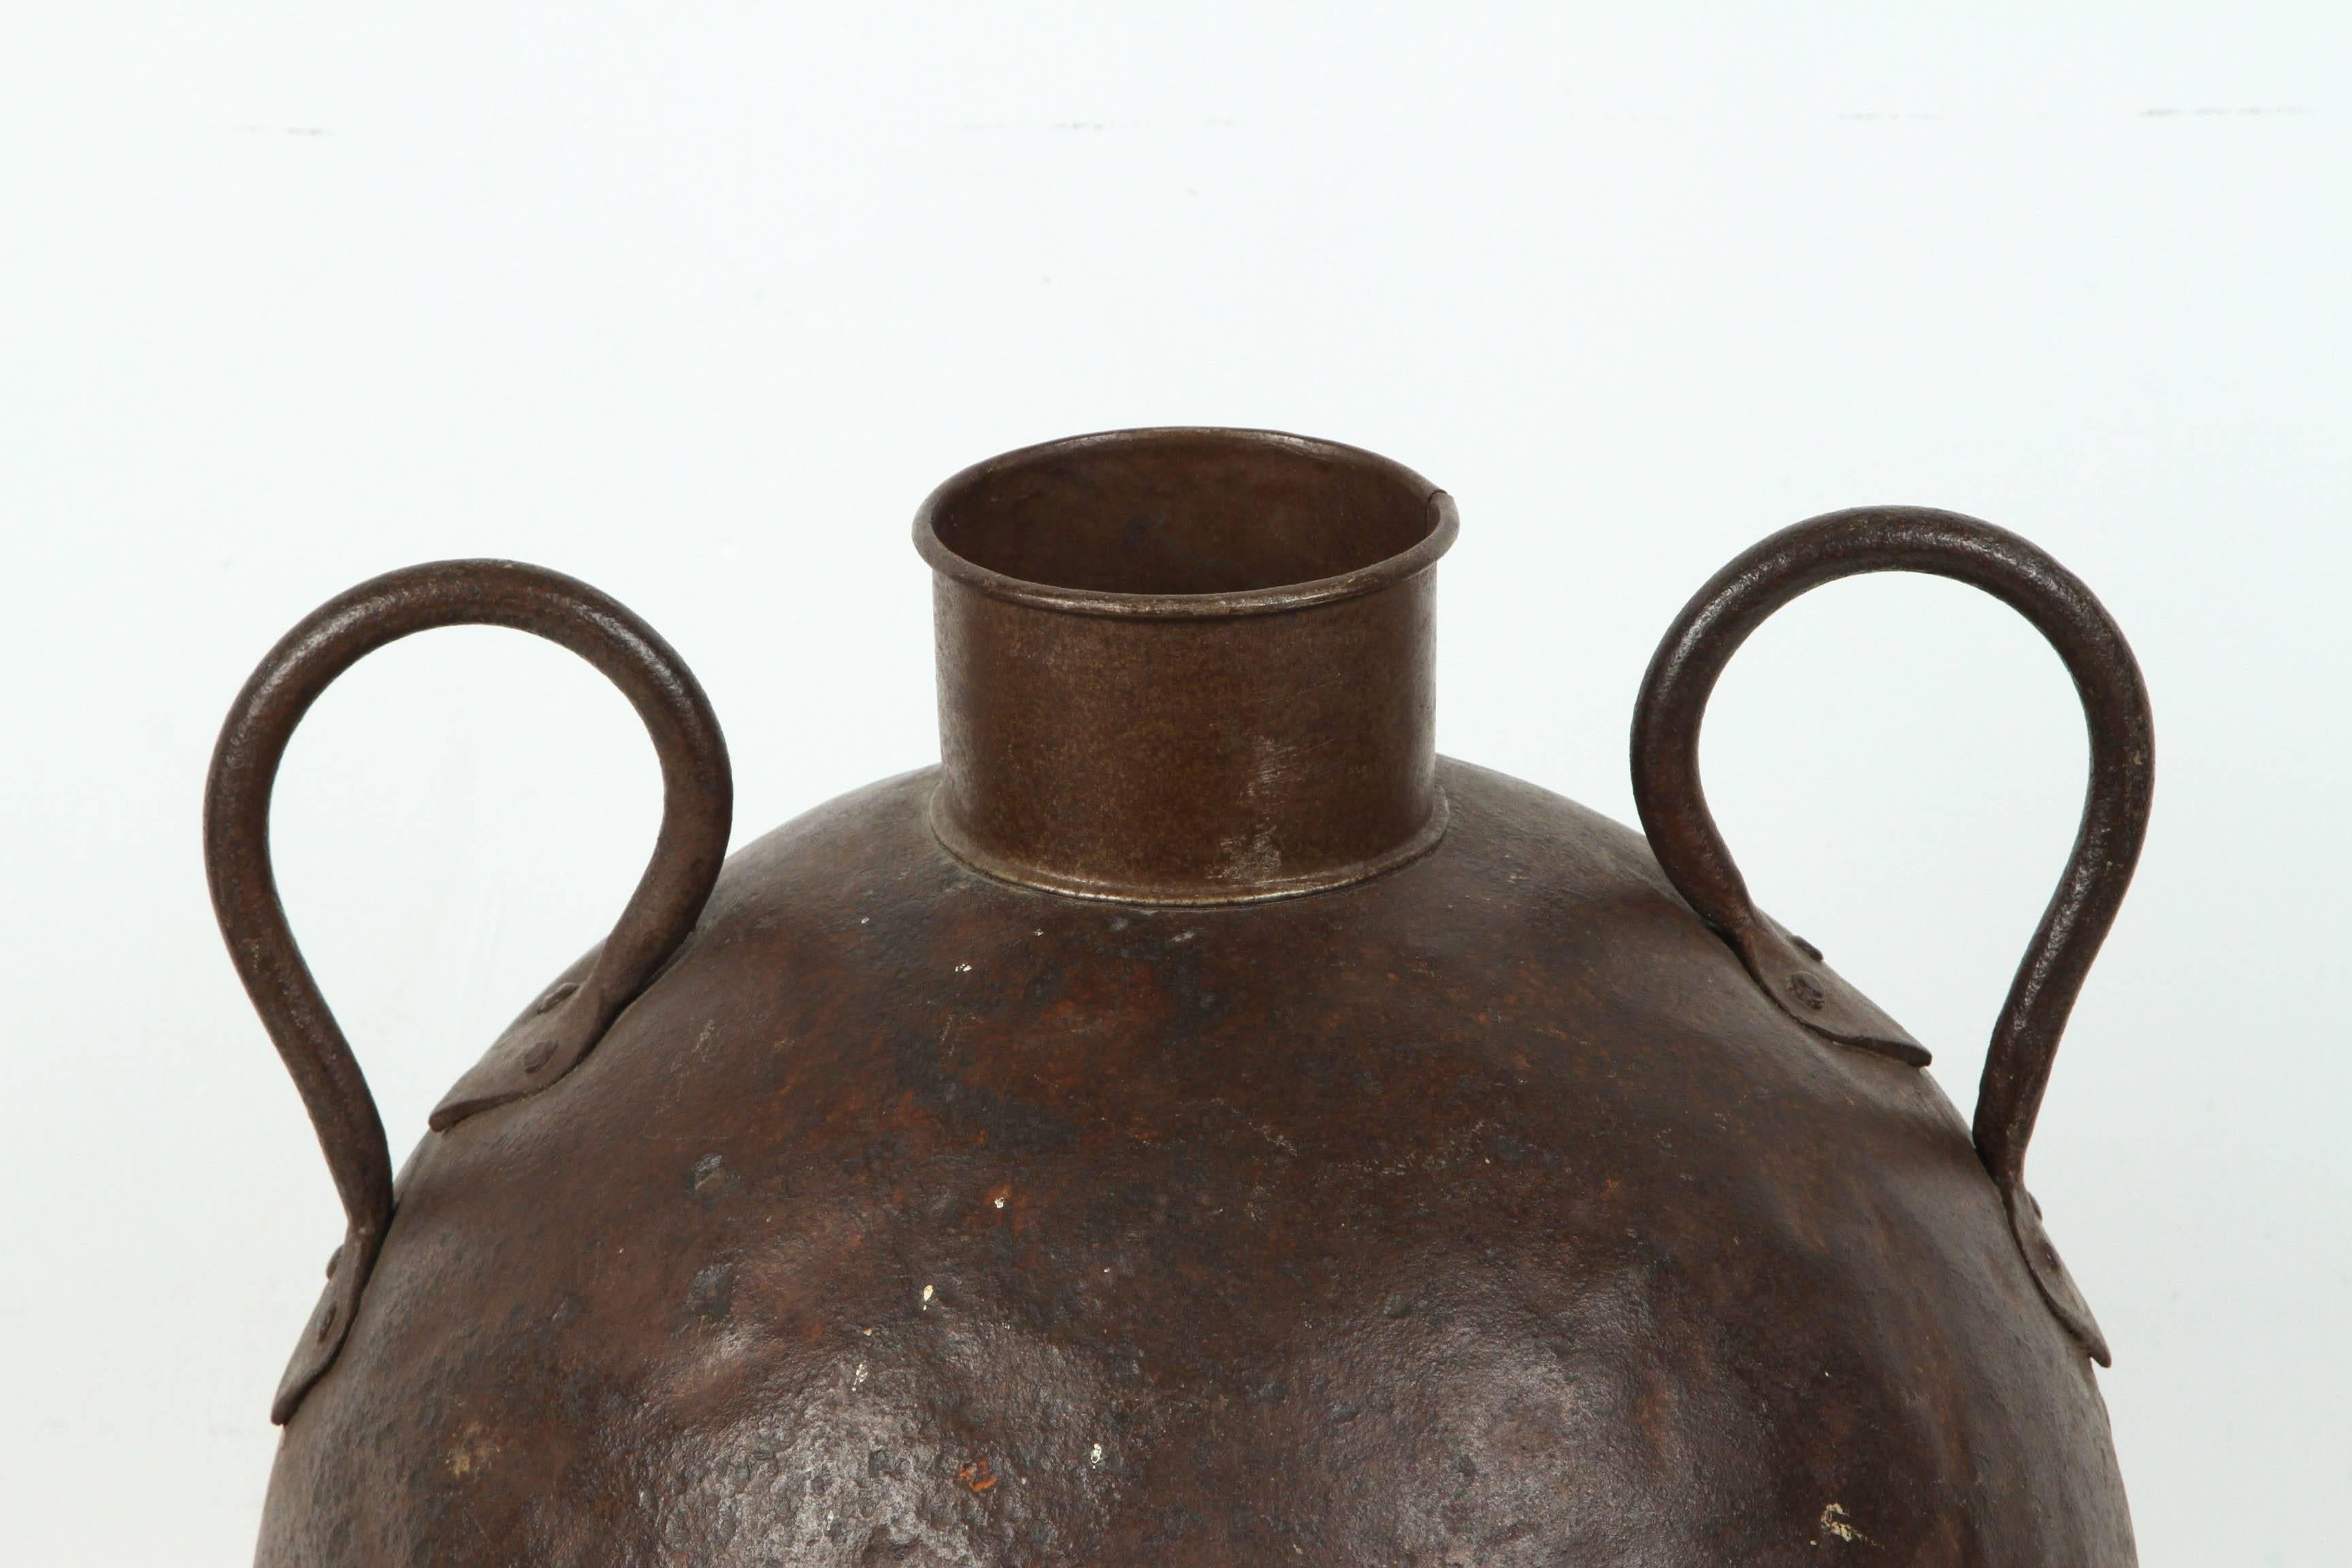 Large metal hand tooled water jar with handles, well used, nice antique rust patina, use it indoor or outdoor, great in the garden.
South East India.